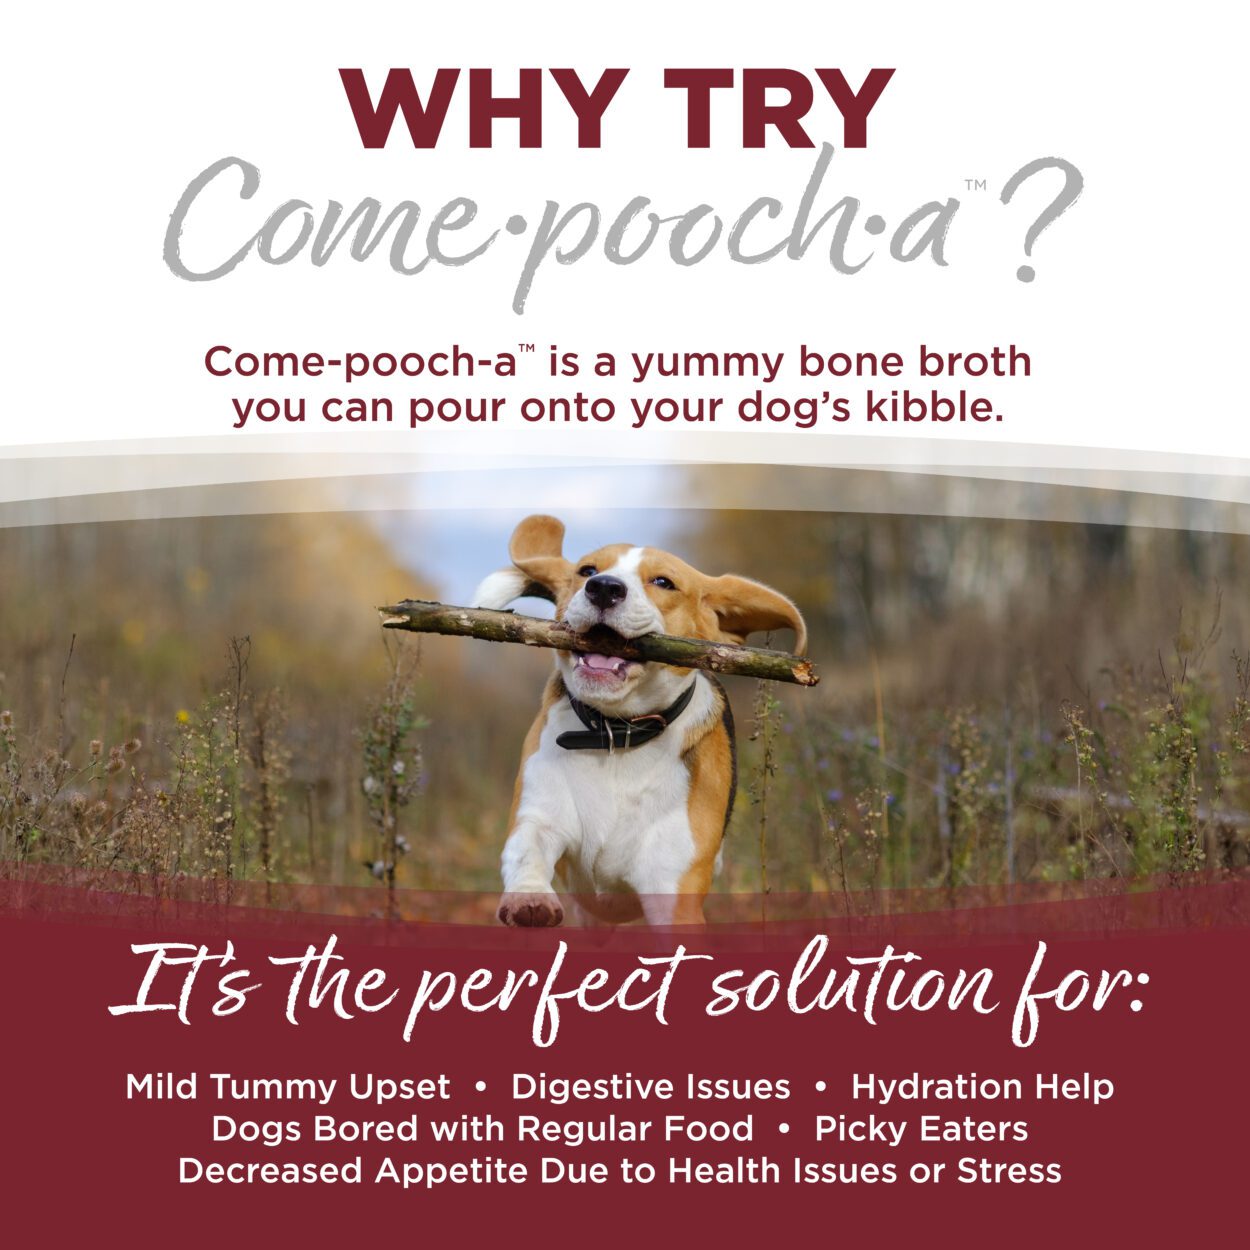 WHY TRY COME-POOCH-A?